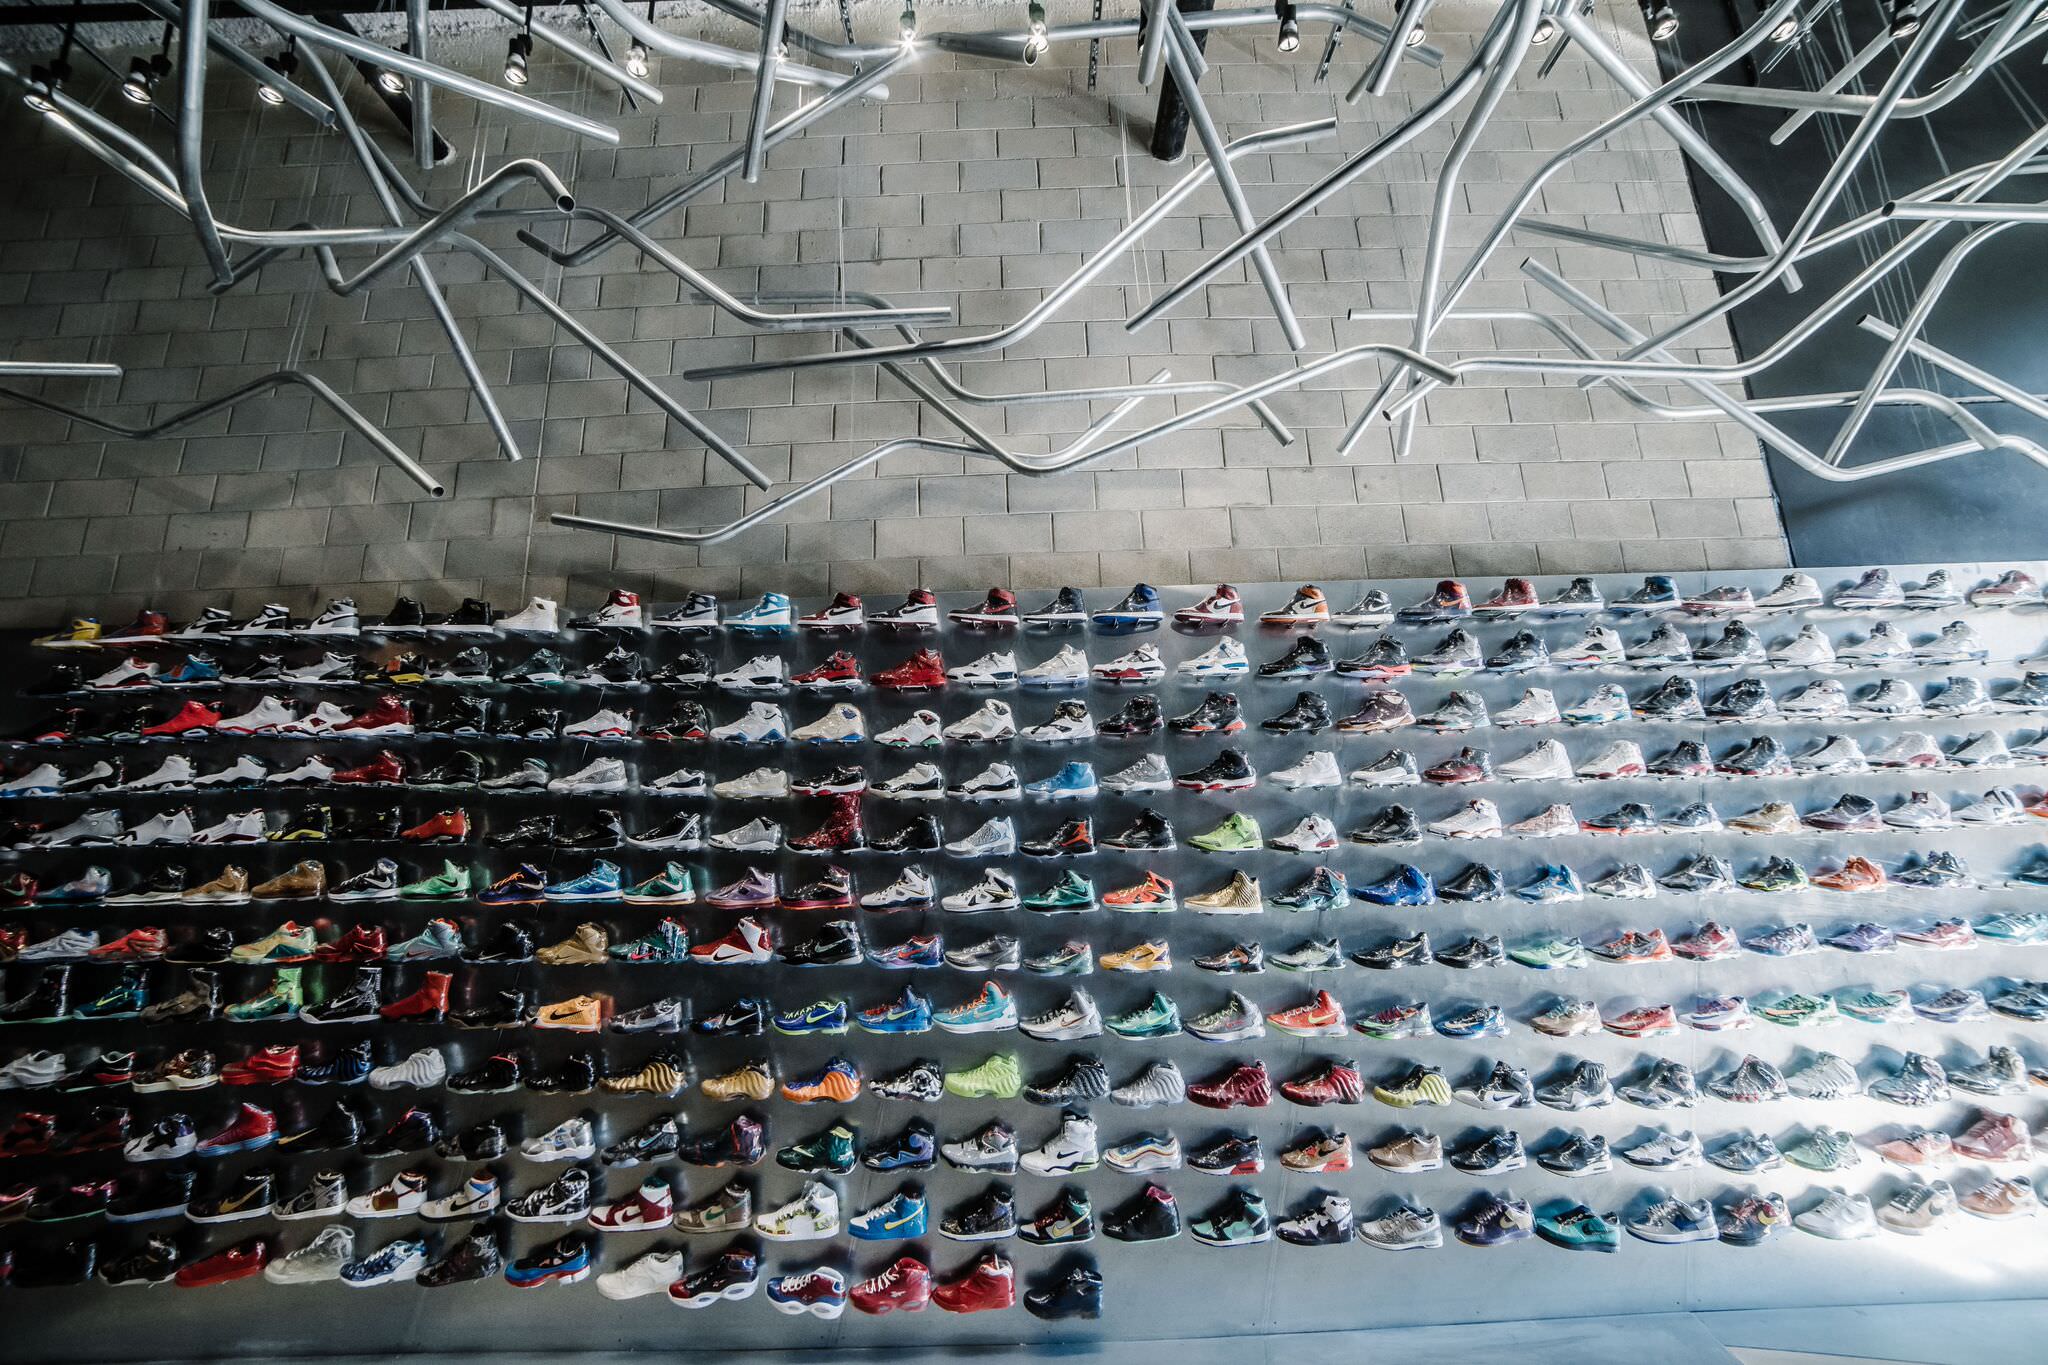 Wall of shoes